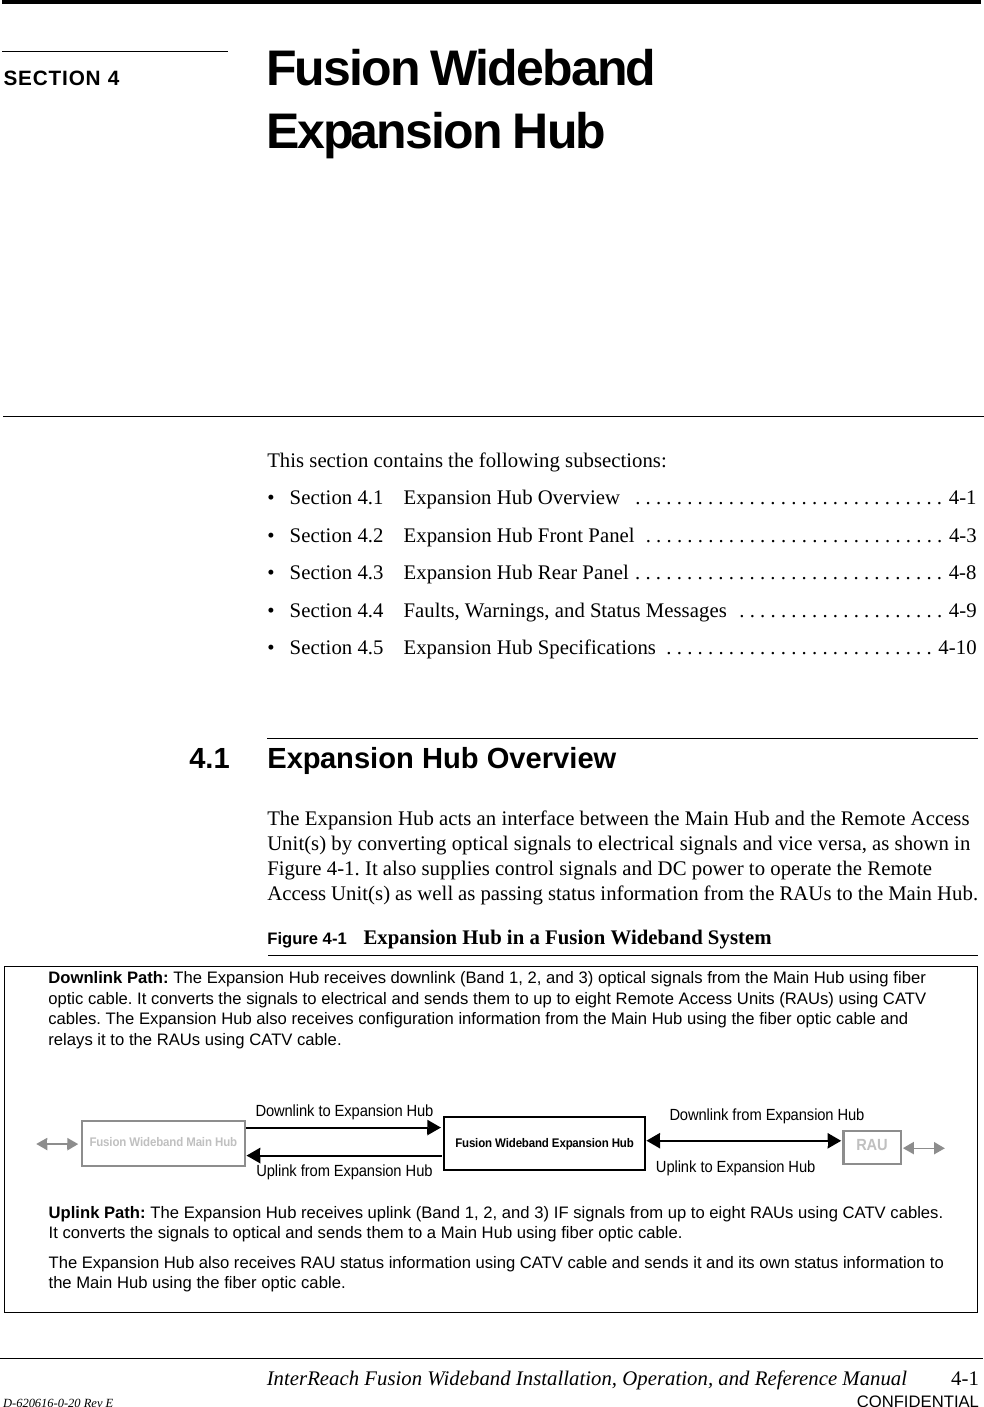 InterReach Fusion Wideband Installation, Operation, and Reference Manual 4-1D-620616-0-20 Rev E CONFIDENTIALSECTION 4 Fusion Wideband Expansion HubThis section contains the following subsections:• Section 4.1   Expansion Hub Overview   . . . . . . . . . . . . . . . . . . . . . . . . . . . . . . 4-1• Section 4.2   Expansion Hub Front Panel  . . . . . . . . . . . . . . . . . . . . . . . . . . . . . 4-3• Section 4.3   Expansion Hub Rear Panel . . . . . . . . . . . . . . . . . . . . . . . . . . . . . . 4-8• Section 4.4   Faults, Warnings, and Status Messages  . . . . . . . . . . . . . . . . . . . . 4-9• Section 4.5   Expansion Hub Specifications  . . . . . . . . . . . . . . . . . . . . . . . . . . 4-104.1 Expansion Hub OverviewThe Expansion Hub acts an interface between the Main Hub and the Remote Access Unit(s) by converting optical signals to electrical signals and vice versa, as shown in Figure 4-1. It also supplies control signals and DC power to operate the Remote Access Unit(s) as well as passing status information from the RAUs to the Main Hub.Figure 4-1 Expansion Hub in a Fusion Wideband SystemFusion Wideband Expansion HubFusion Wideband Main HubRAUDownlink Path: The Expansion Hub receives downlink (Band 1, 2, and 3) optical signals from the Main Hub using fiber optic cable. It converts the signals to electrical and sends them to up to eight Remote Access Units (RAUs) using CATV cables. The Expansion Hub also receives configuration information from the Main Hub using the fiber optic cable and relays it to the RAUs using CATV cable.Uplink Path: The Expansion Hub receives uplink (Band 1, 2, and 3) IF signals from up to eight RAUs using CATV cables. It converts the signals to optical and sends them to a Main Hub using fiber optic cable.The Expansion Hub also receives RAU status information using CATV cable and sends it and its own status information to the Main Hub using the fiber optic cable.Downlink to Expansion HubUplink from Expansion HubDownlink from Expansion HubUplink to Expansion Hub